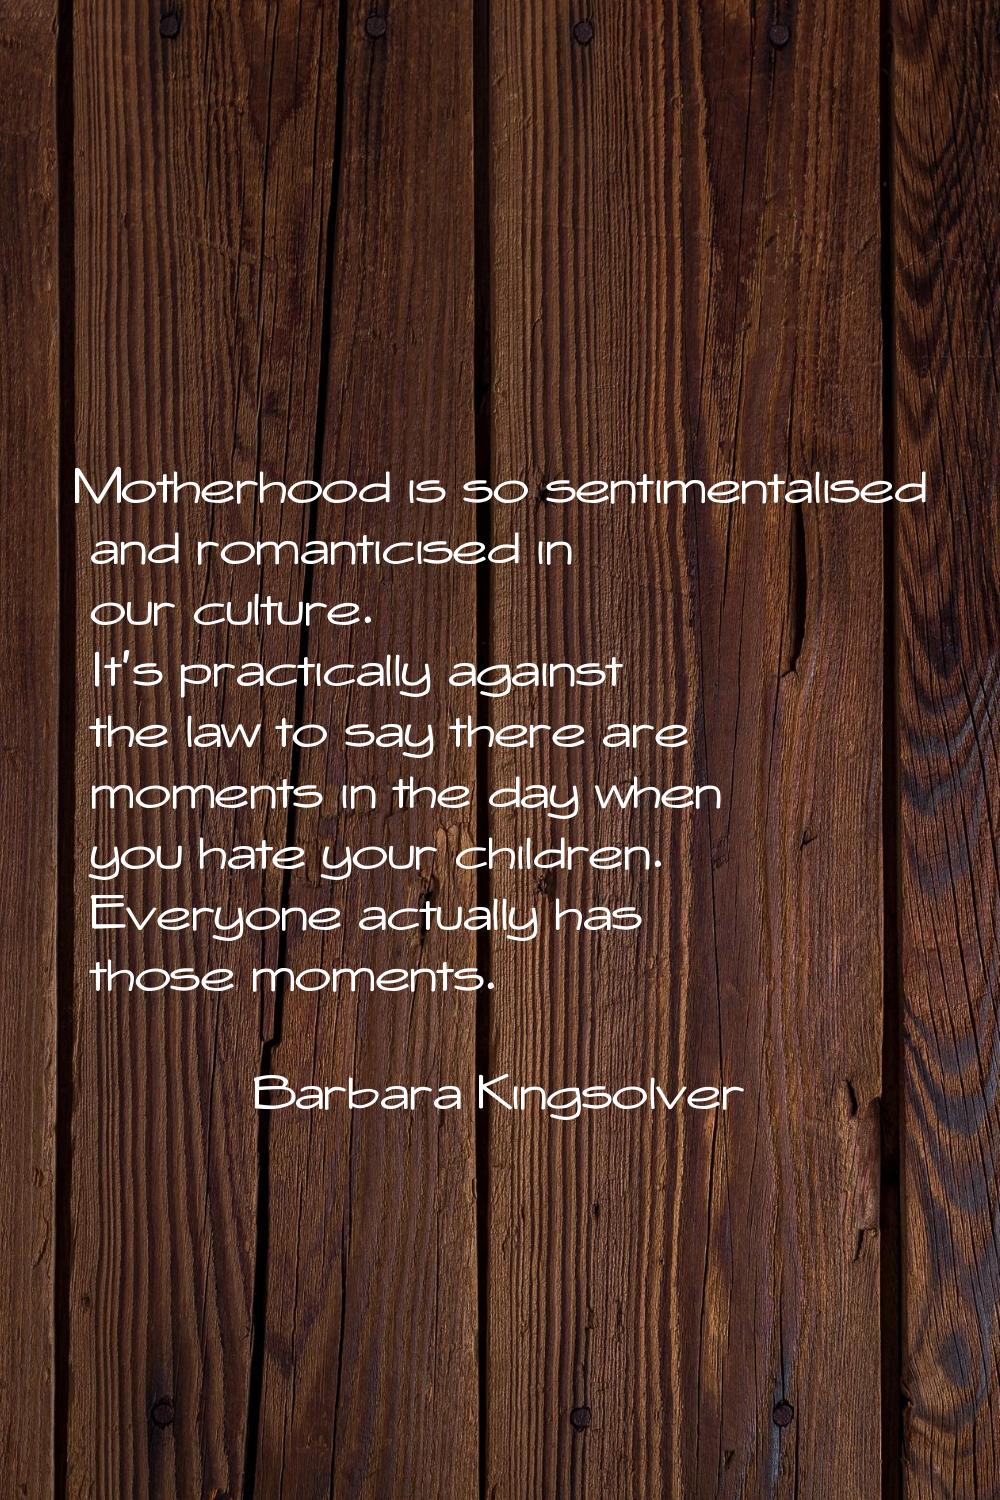 Motherhood is so sentimentalised and romanticised in our culture. It's practically against the law 